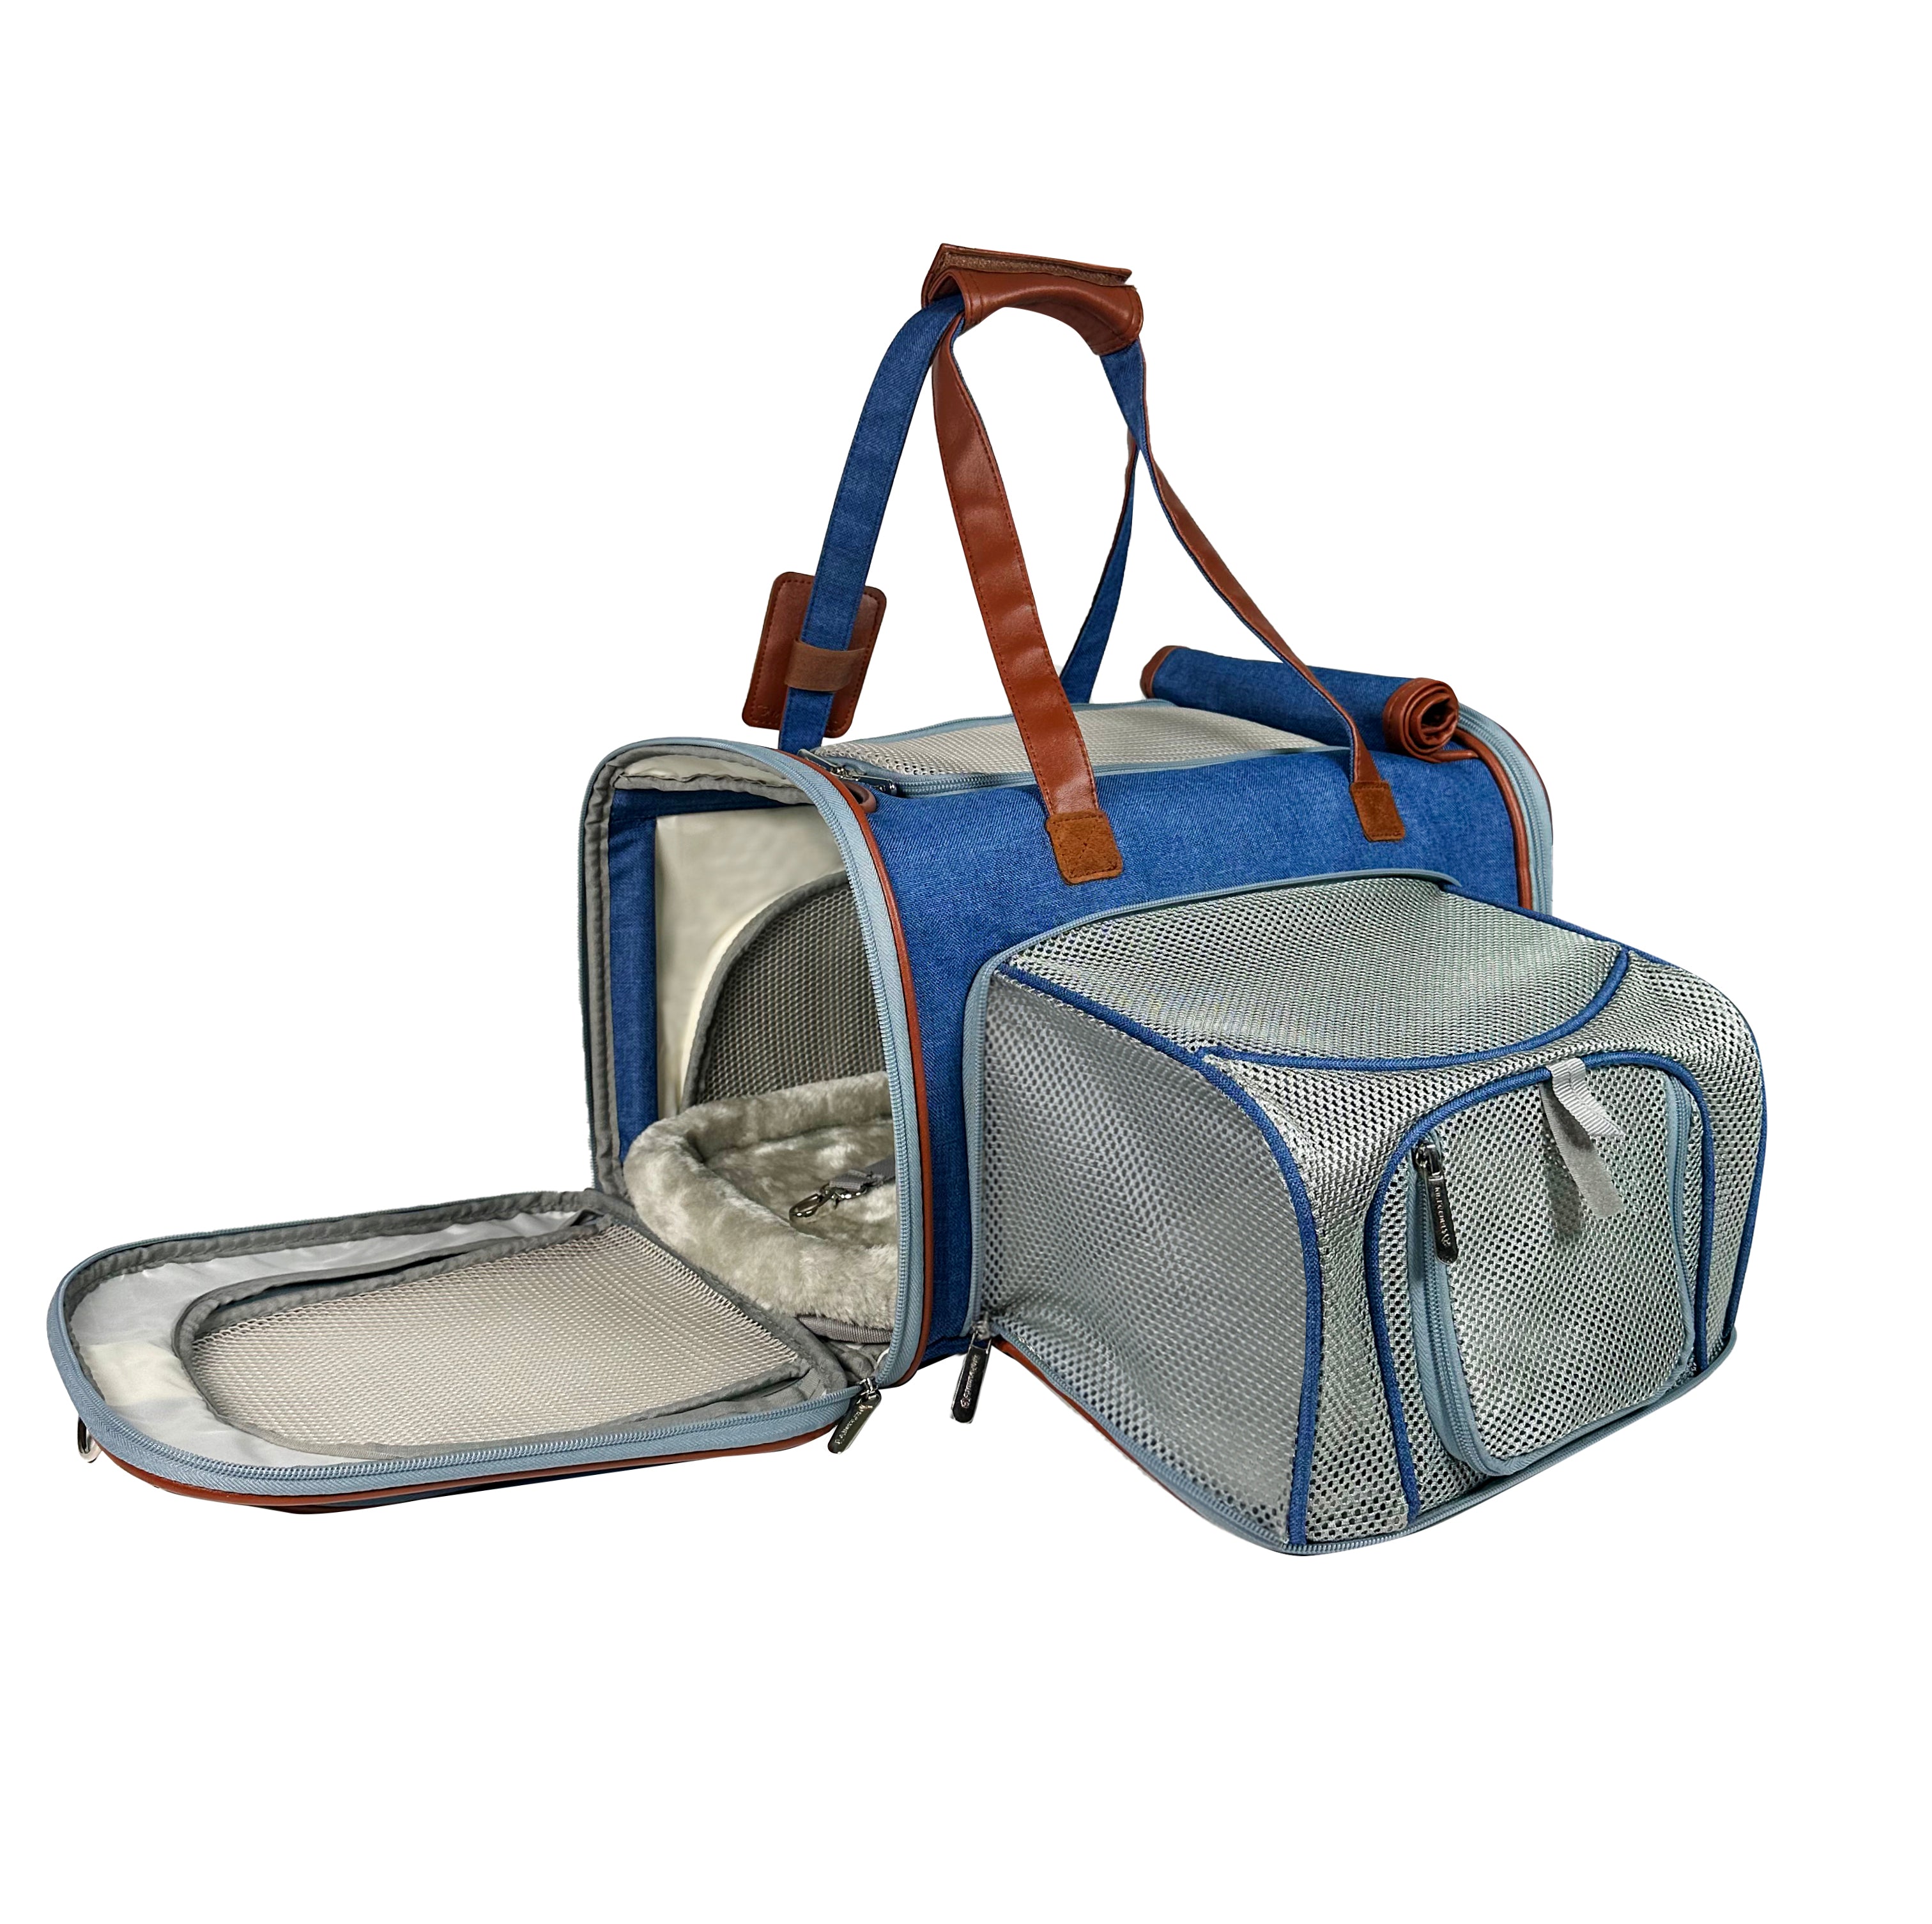 Shop Pawfect Pets Airline Approved Pet Carrie – Luggage Factory